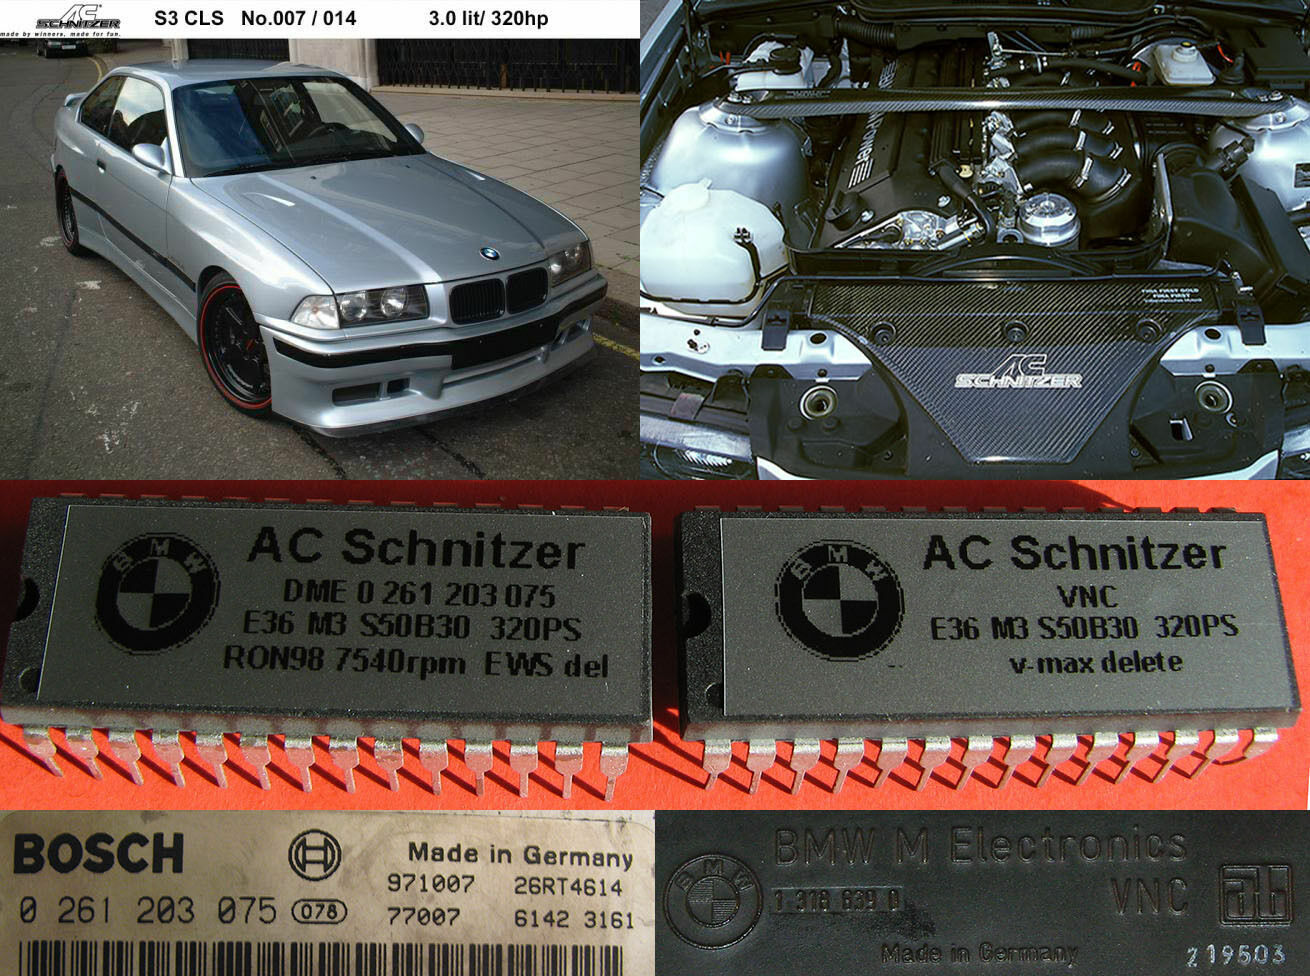 AC Schnitzer +34Hp BMW E36 M3 S50B30 3.0 320Hp chips like CLS S3 - VERY  RARE!